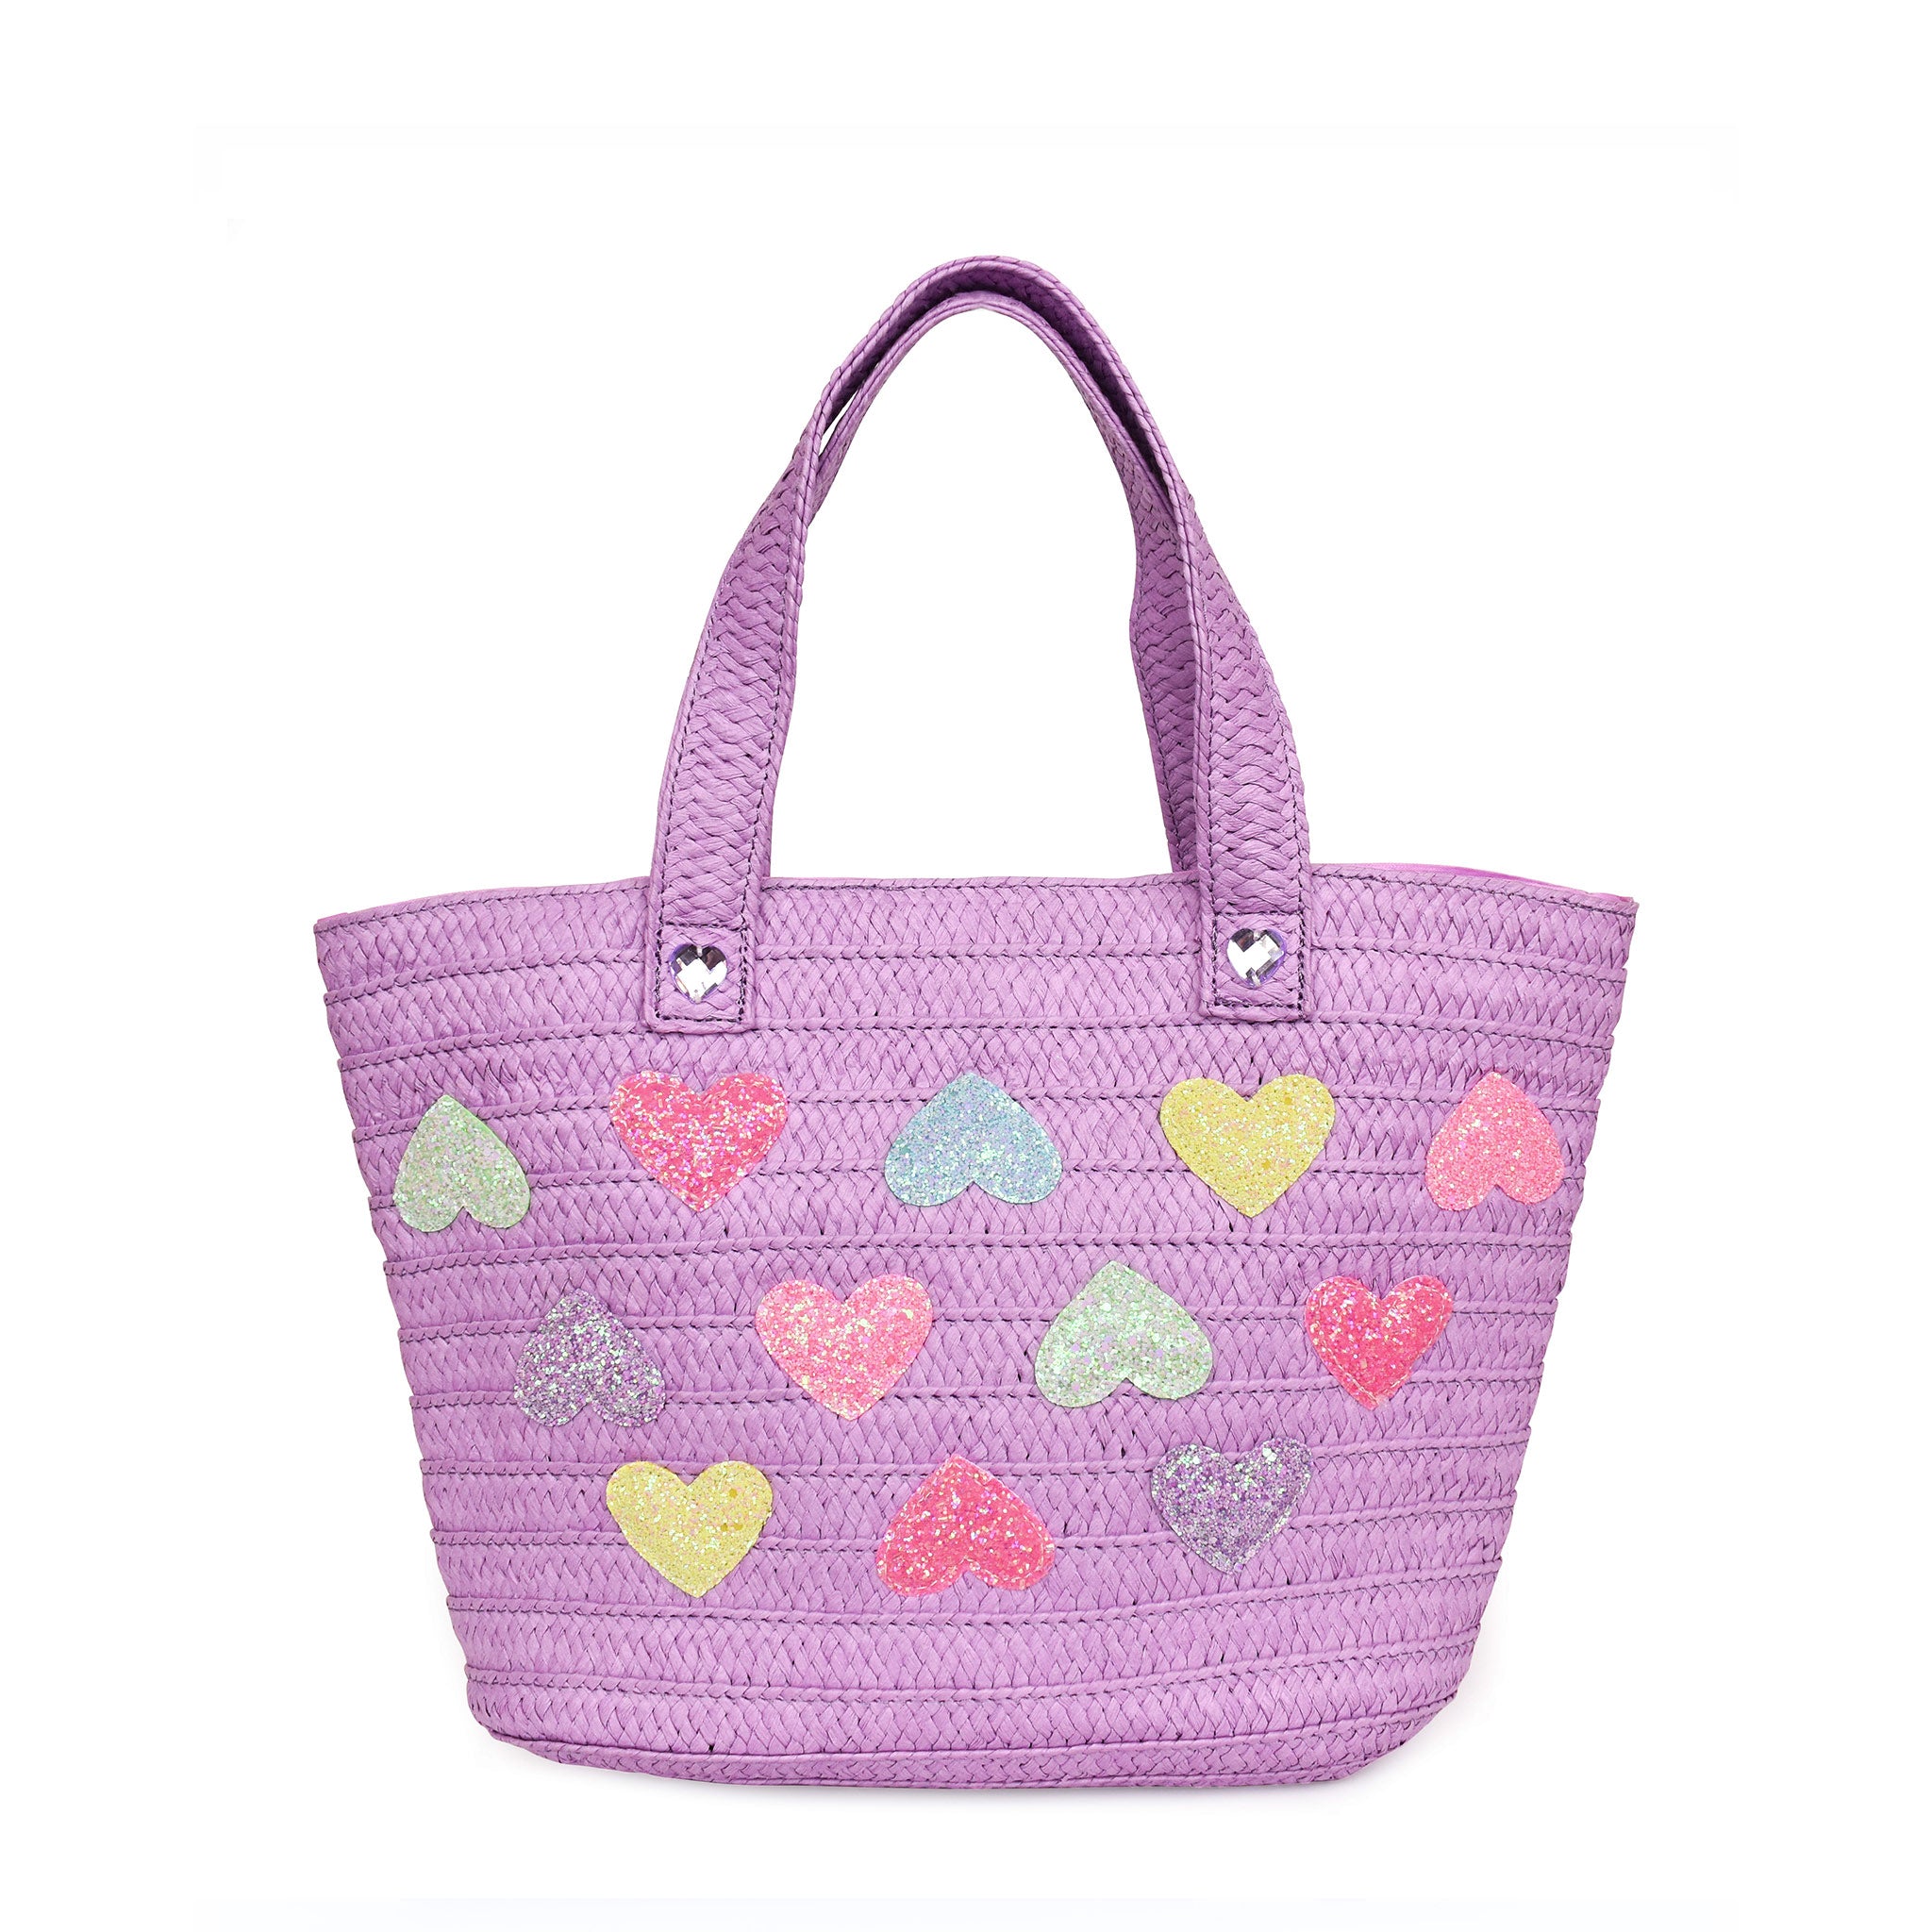 Front view of a large purple straw tote bag covered in glitter heart appliqués 